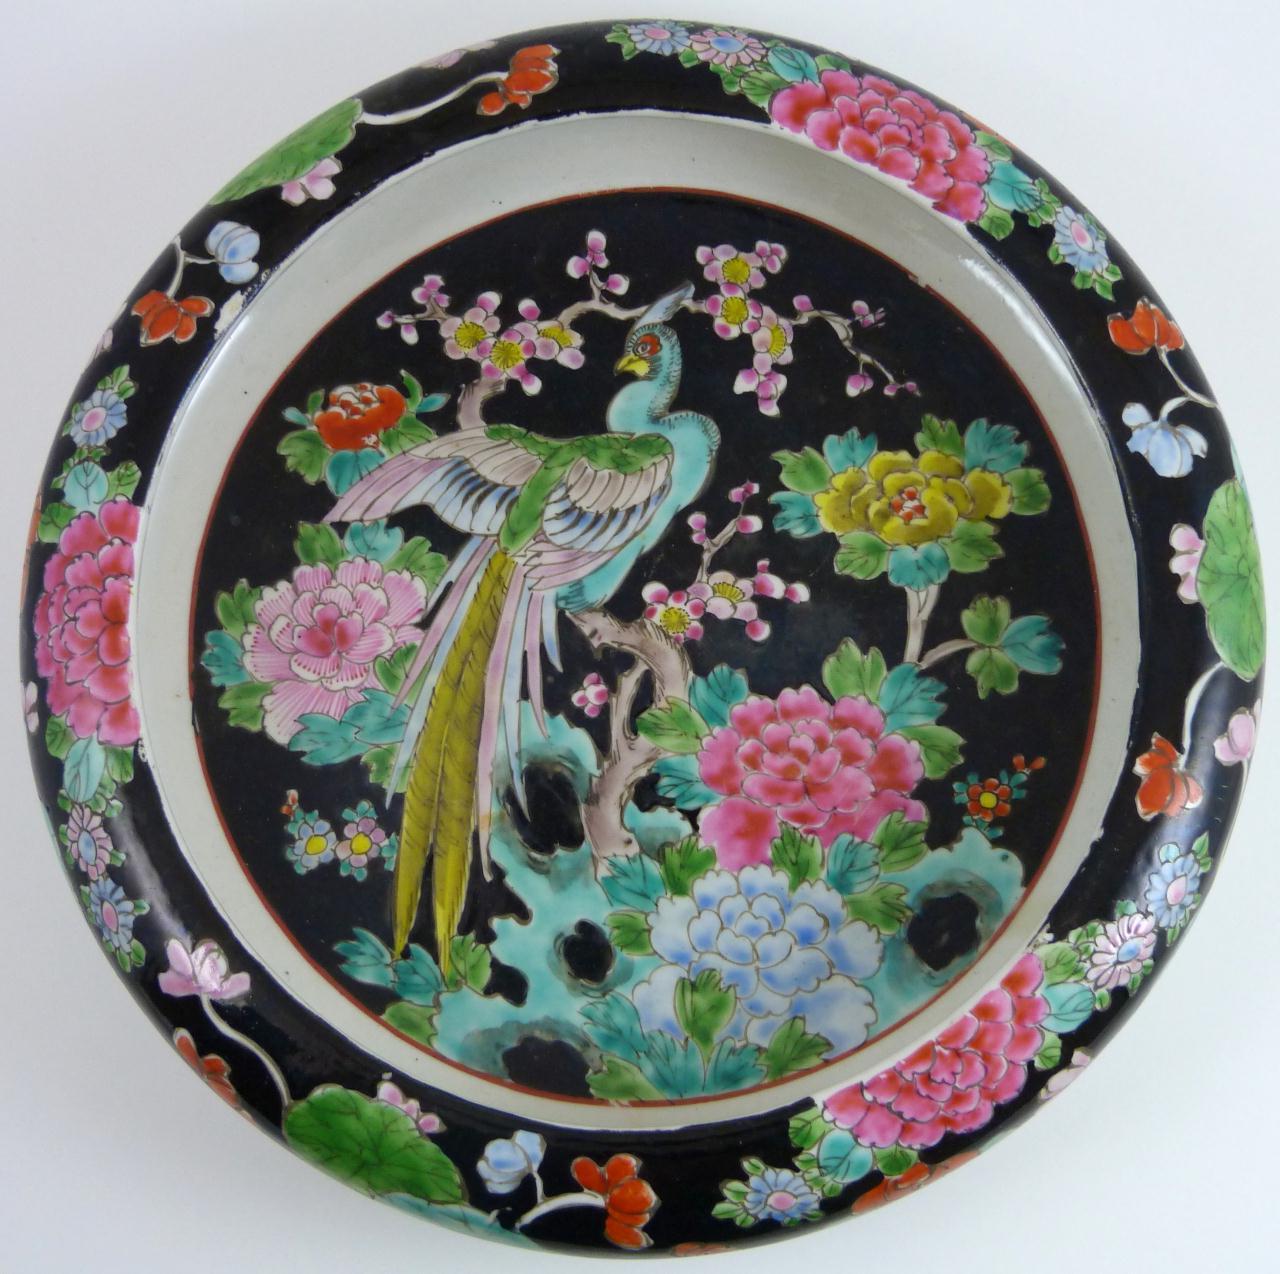 Has a hand painted enameled